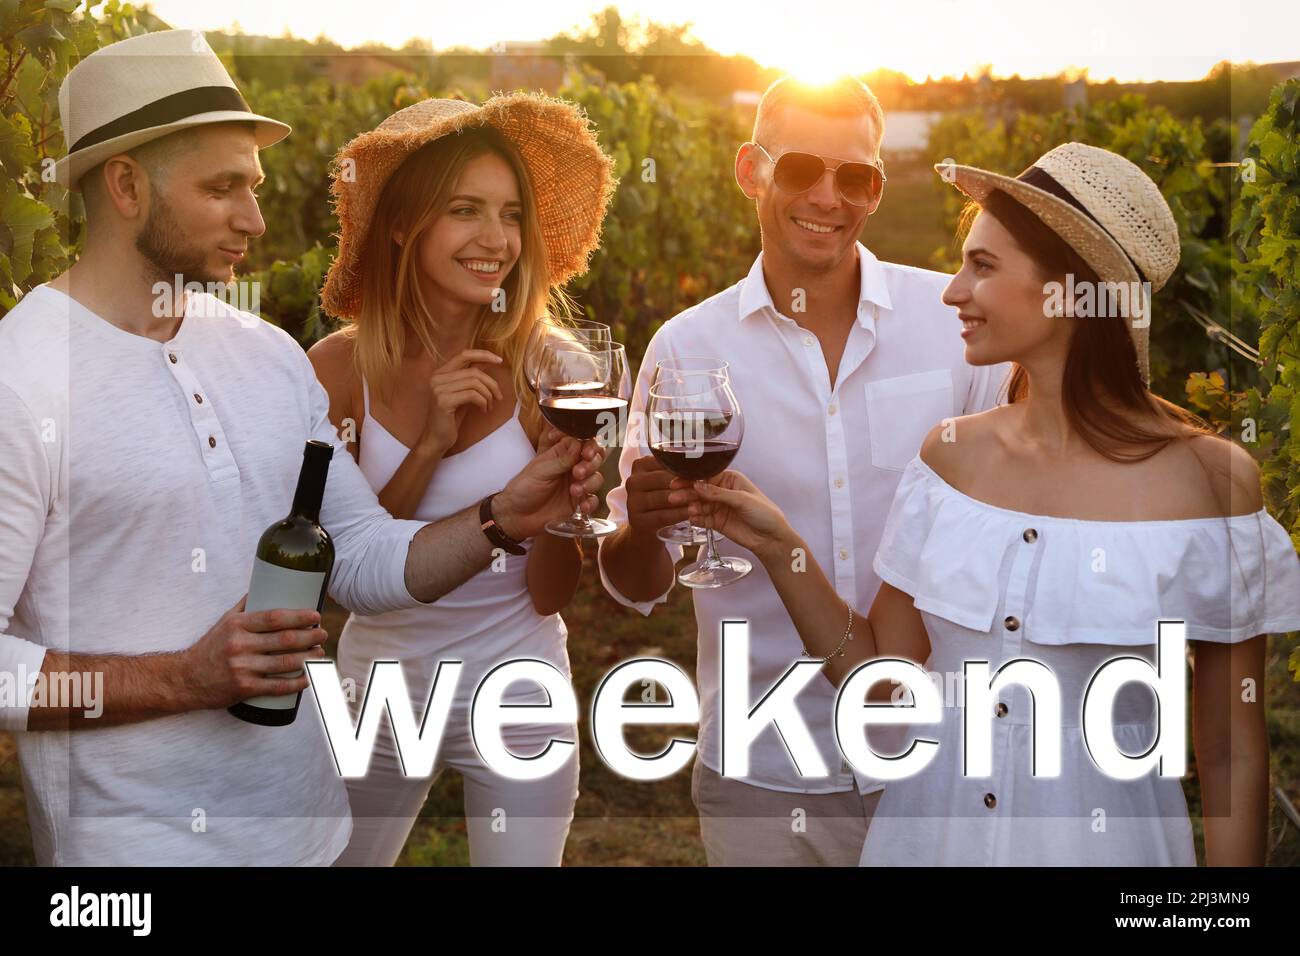 Hello Weekend. Friends clinking glasses of red wine in vineyard on sunny day Stock Photo